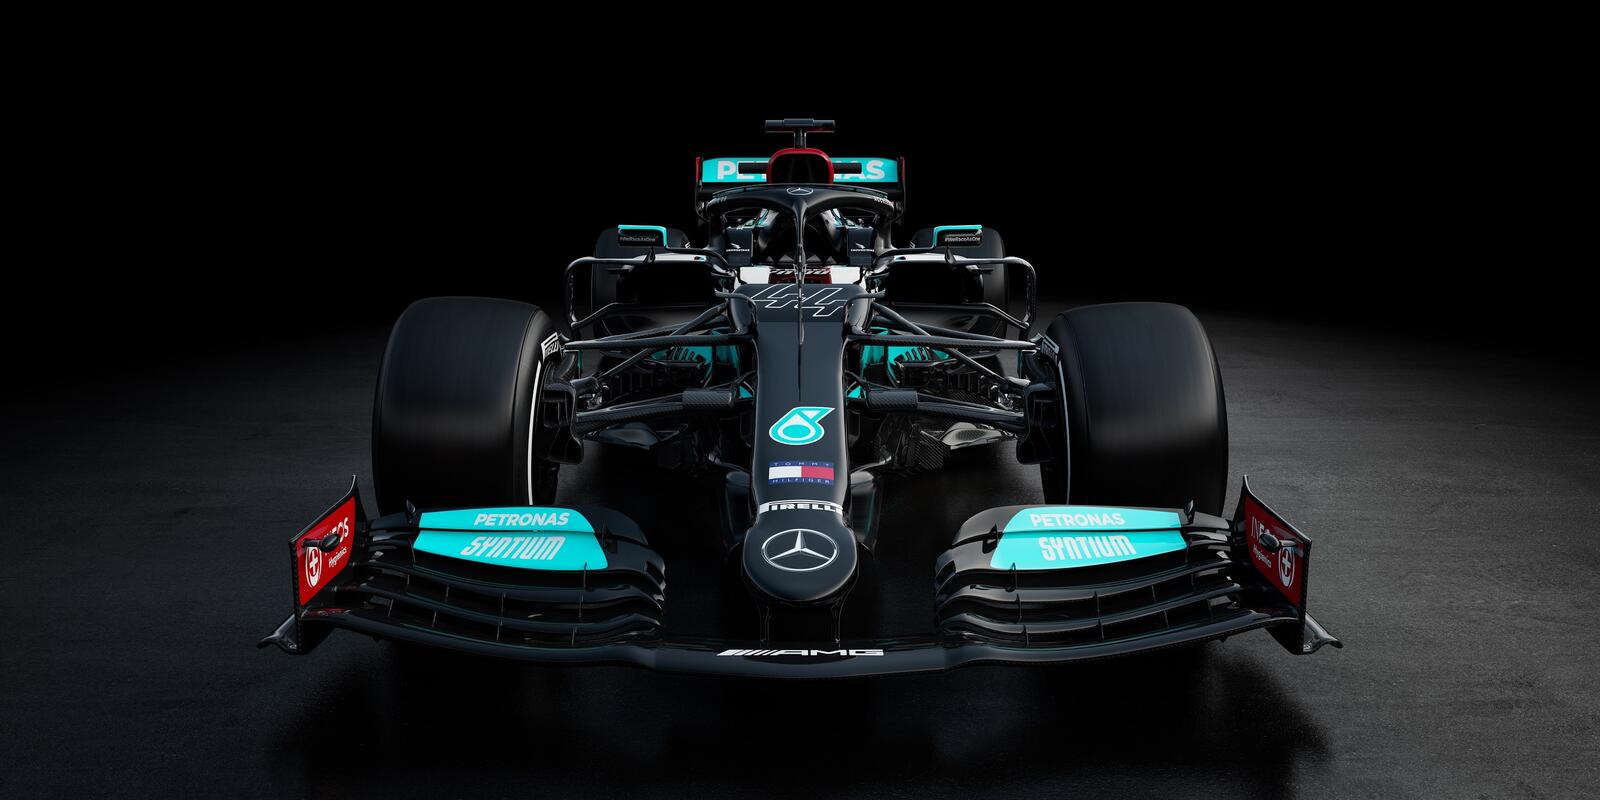 Wallpapers Mercedes Benz F1 cars on the desktop